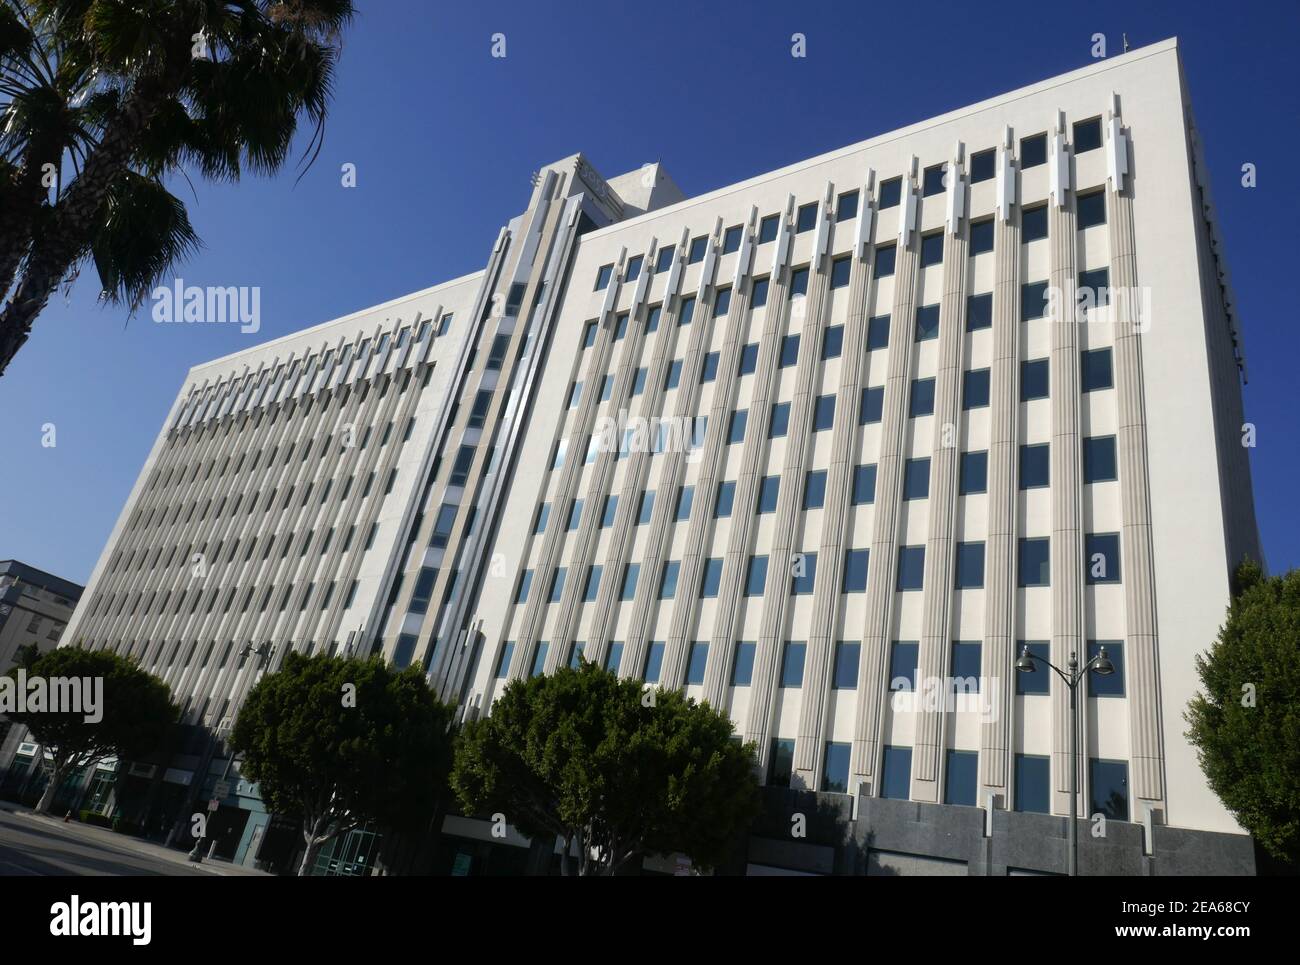 Wilshire Beverly Center - Bank of America Building - Los Angeles